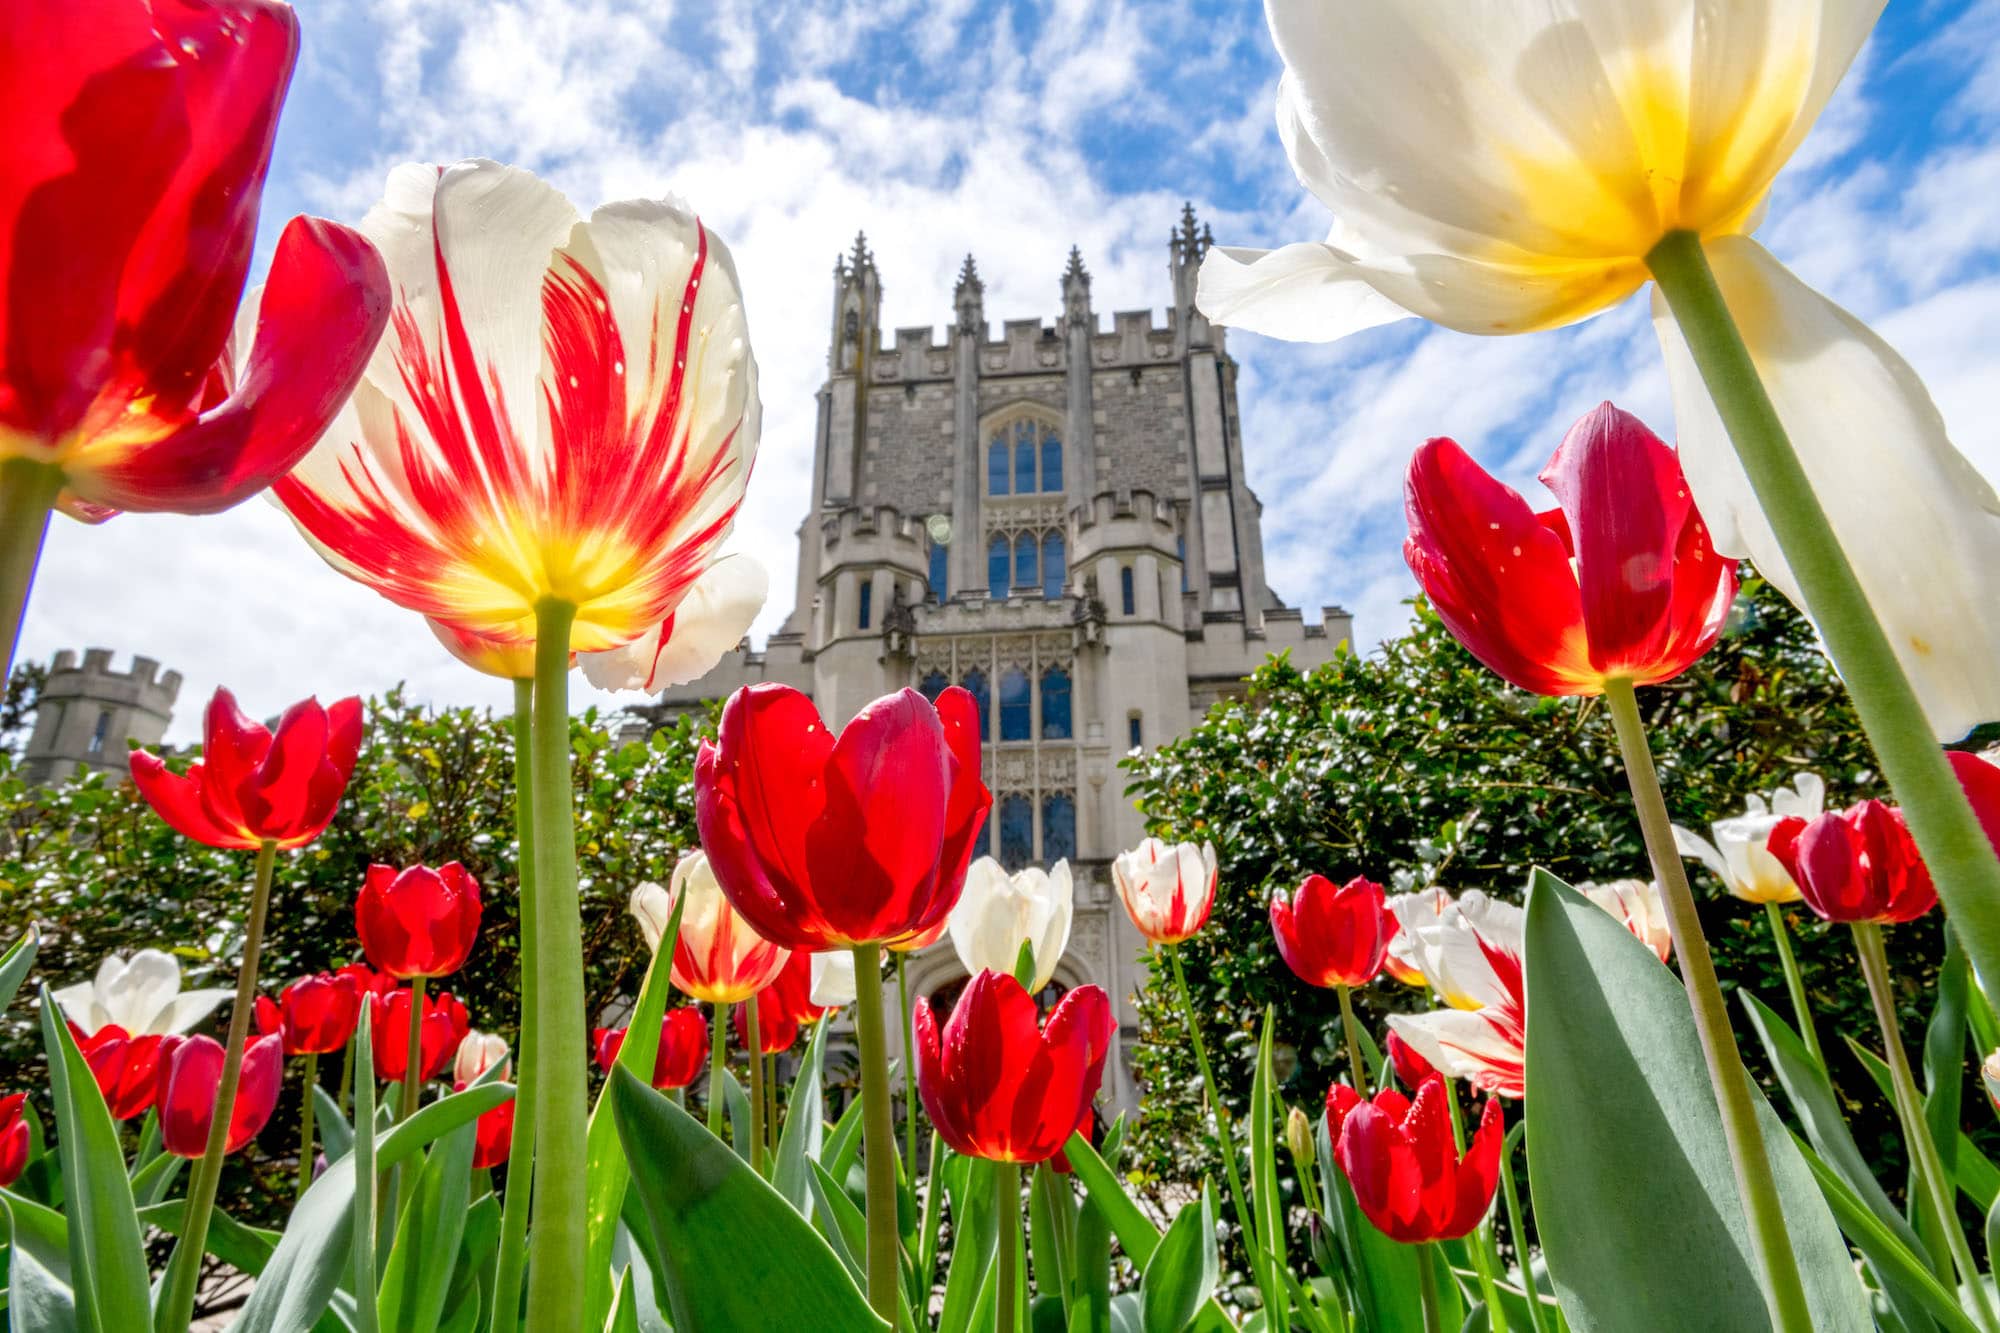 Tulips in red, white and yellow in front of Thompson Library on the Vassar campus, a large, stone building with stained-glass windows and classical architecture.